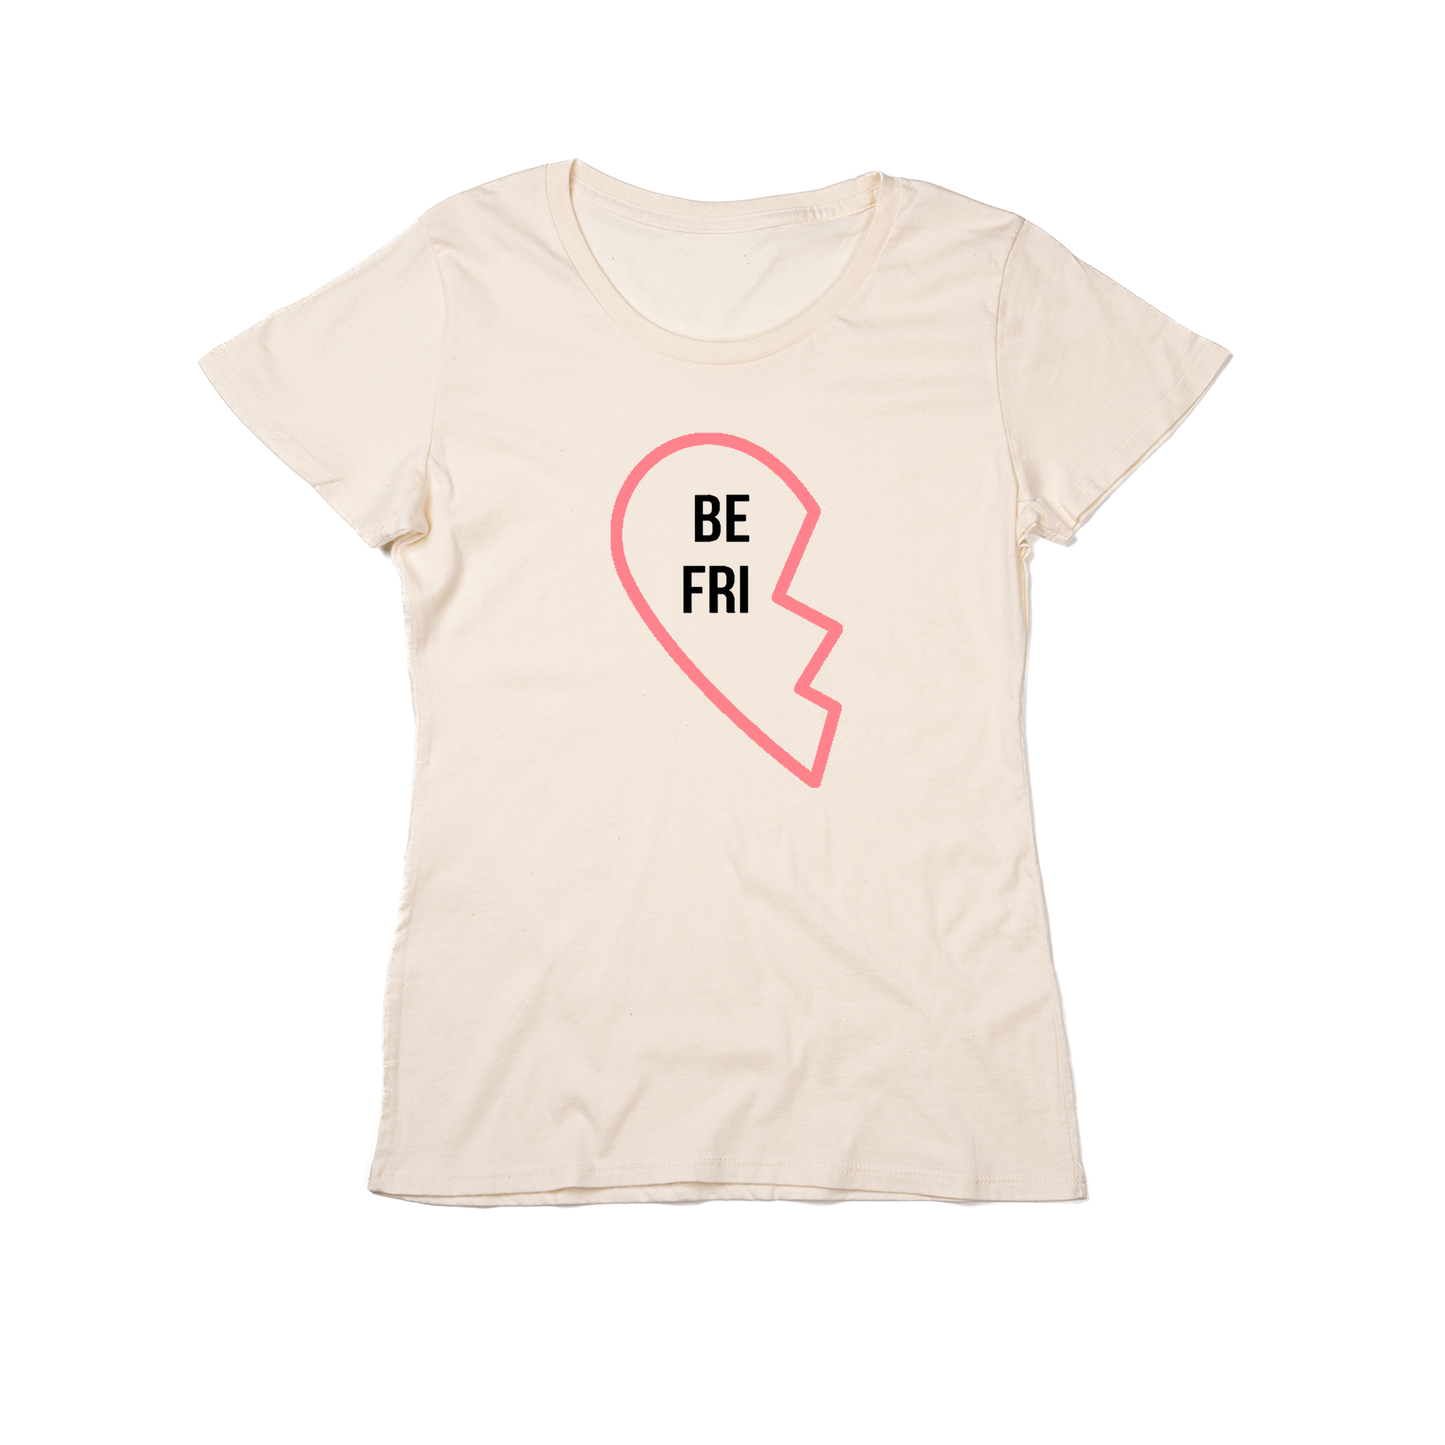 Best Friends (Left Side of Heart) - Women's Fitted Tee (Natural)